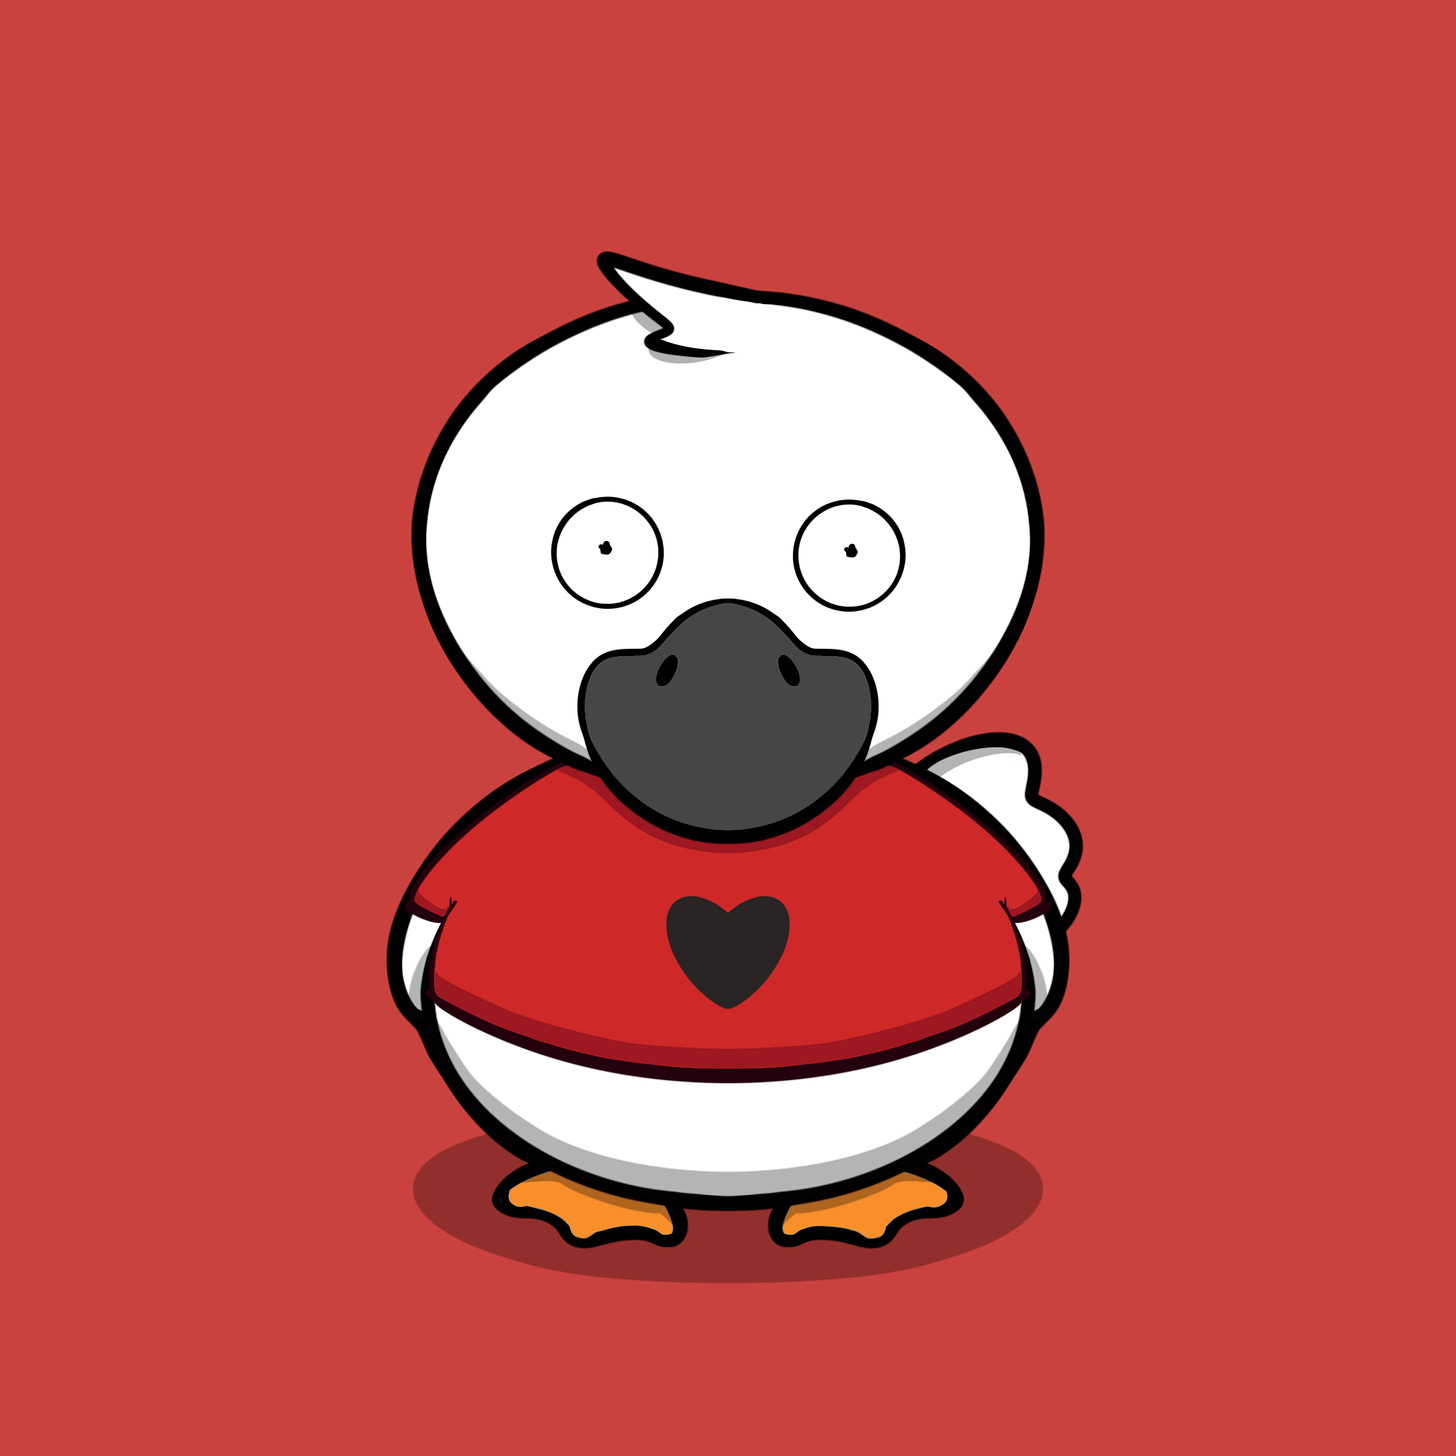 A duck with a heart shirt on a red background.